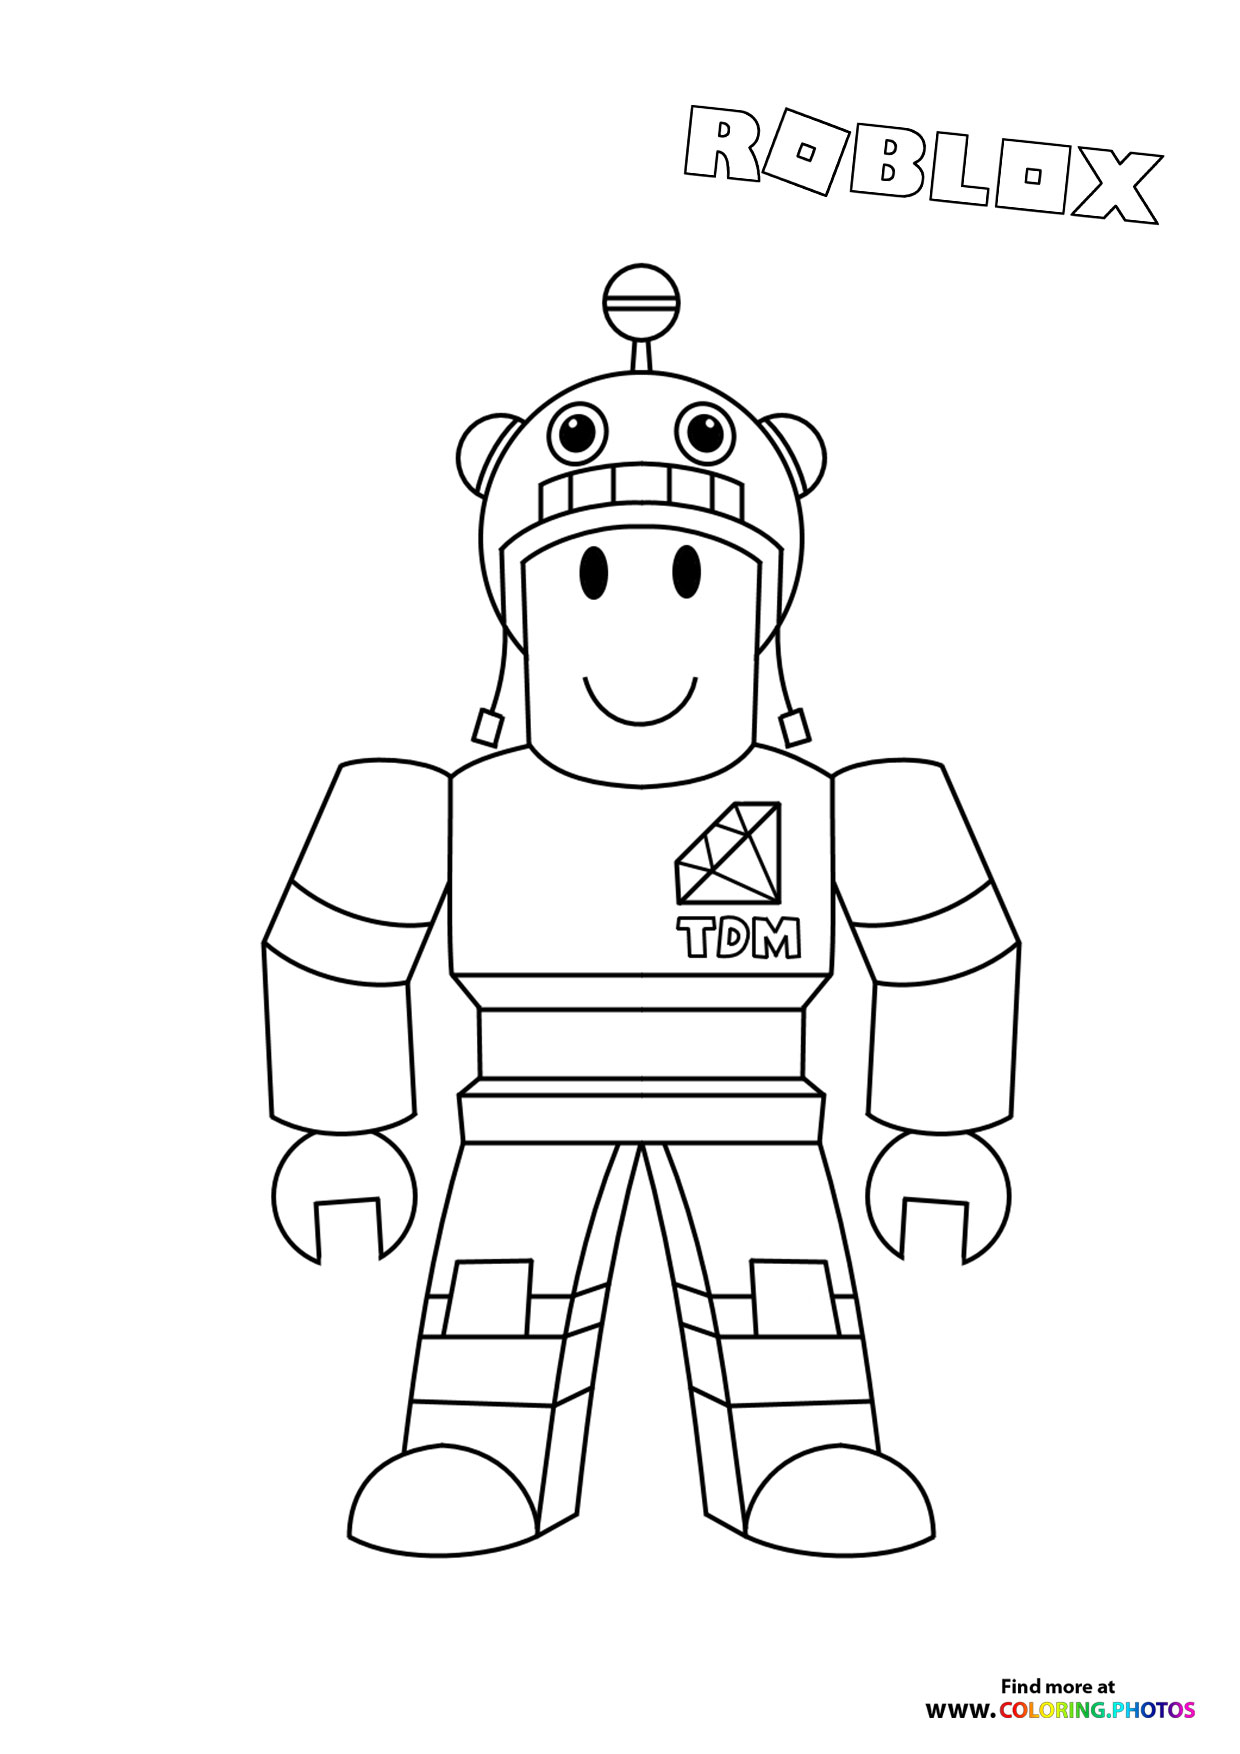 Roblox Characters Coloring Page Free Printable Coloring Pages For Kids ...